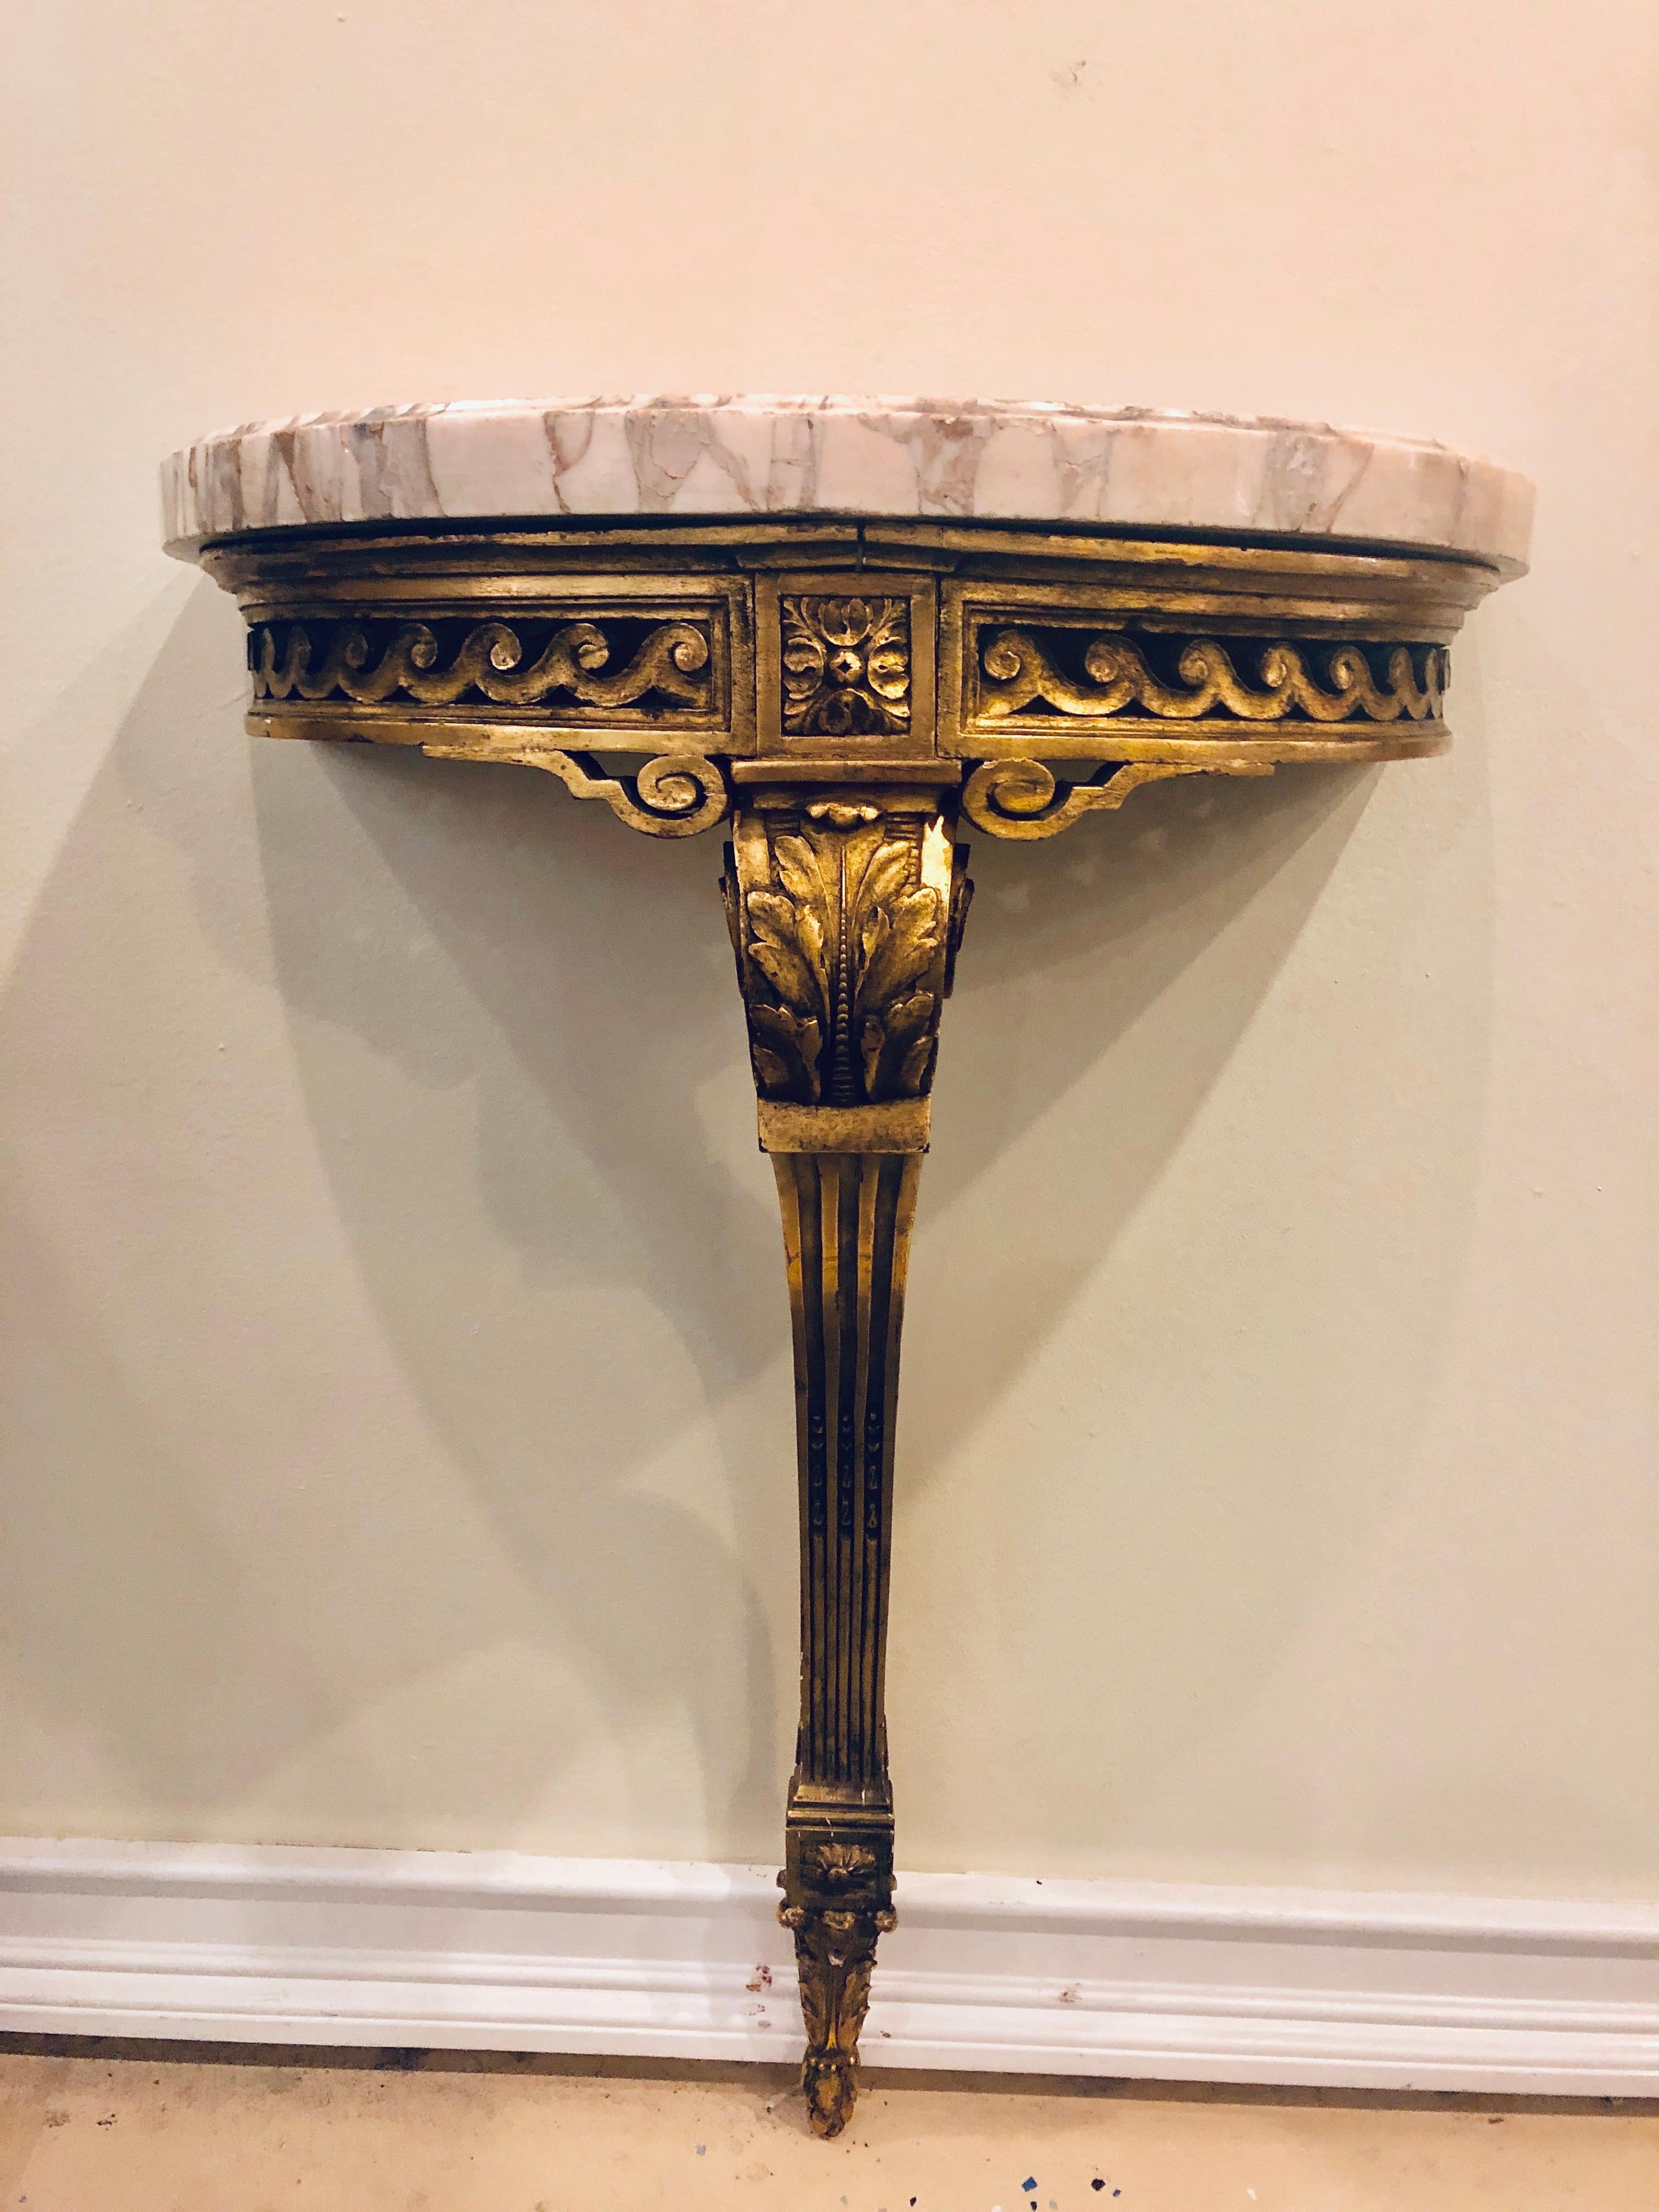 Pair of gilt gold Louis XVI Maison Jansen wall mount Demilune console tables. Each antique gilt wooden console table of Demilune form with pierced carved aprons leading to a center carved S-shaped leg. The whole supporting an antique marble top that